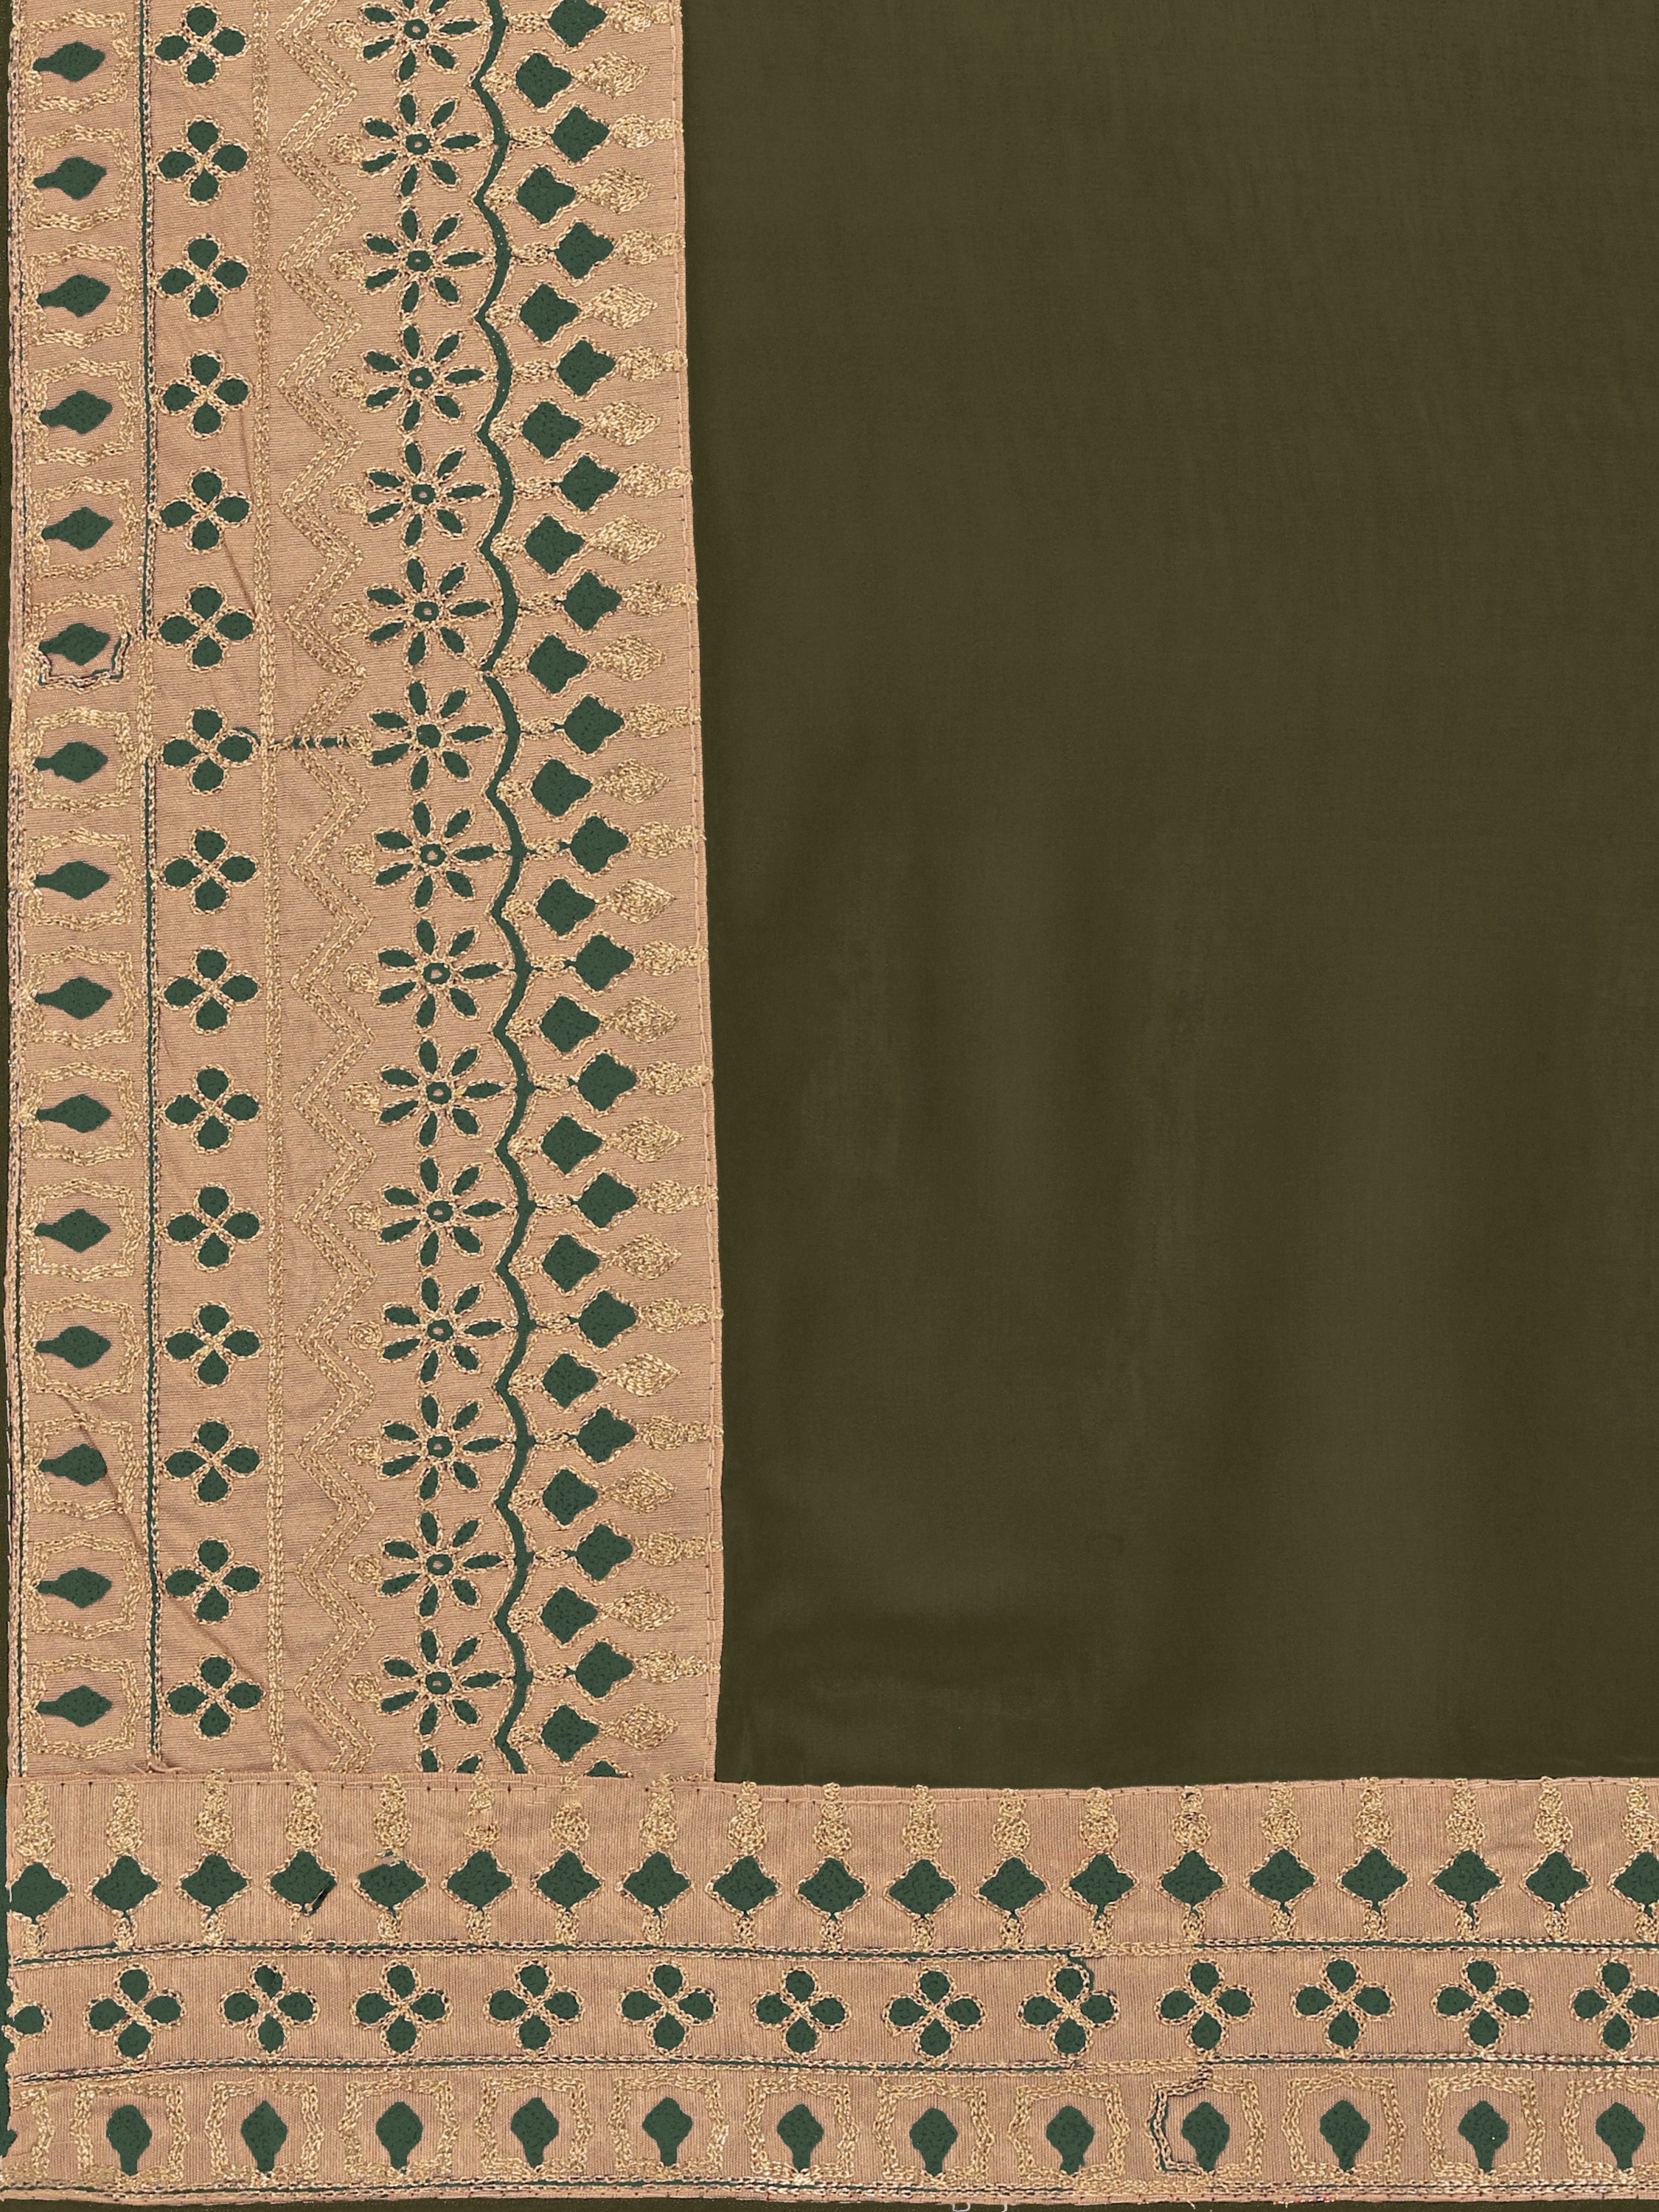 Women's self Woven Solid Occasion Wear Cotton Silk Embroided Heavy Border Sari With Blouse Piece (Mehandi Green) - NIMIDHYA